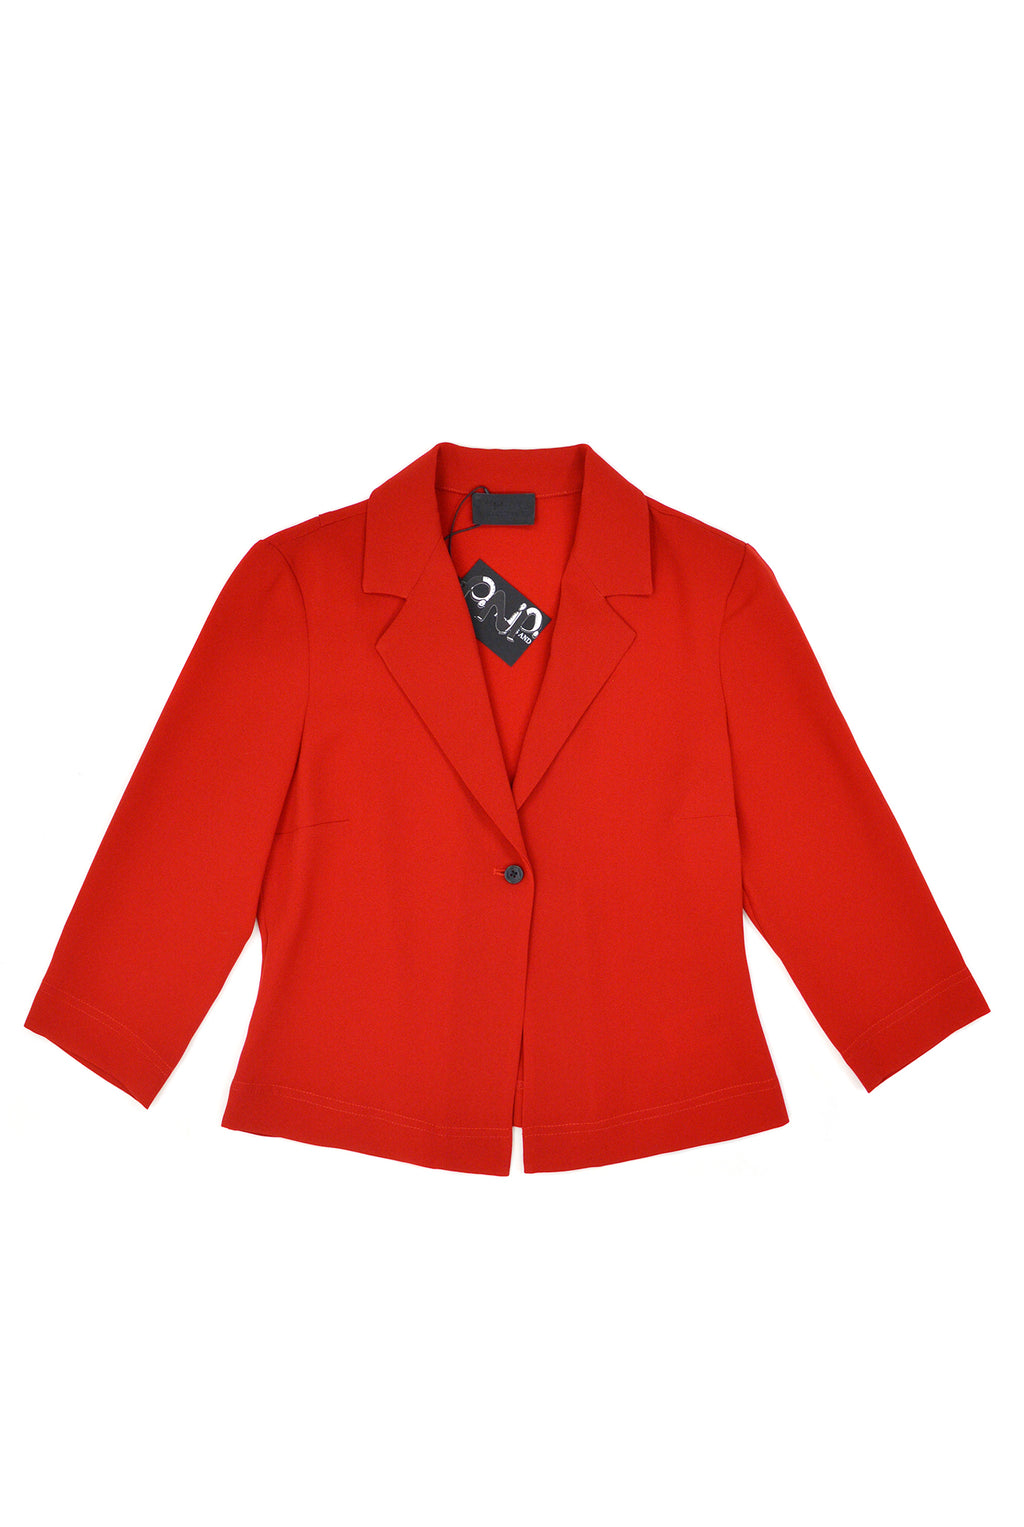 Puppets and Puppets Fitted Blazer, Red